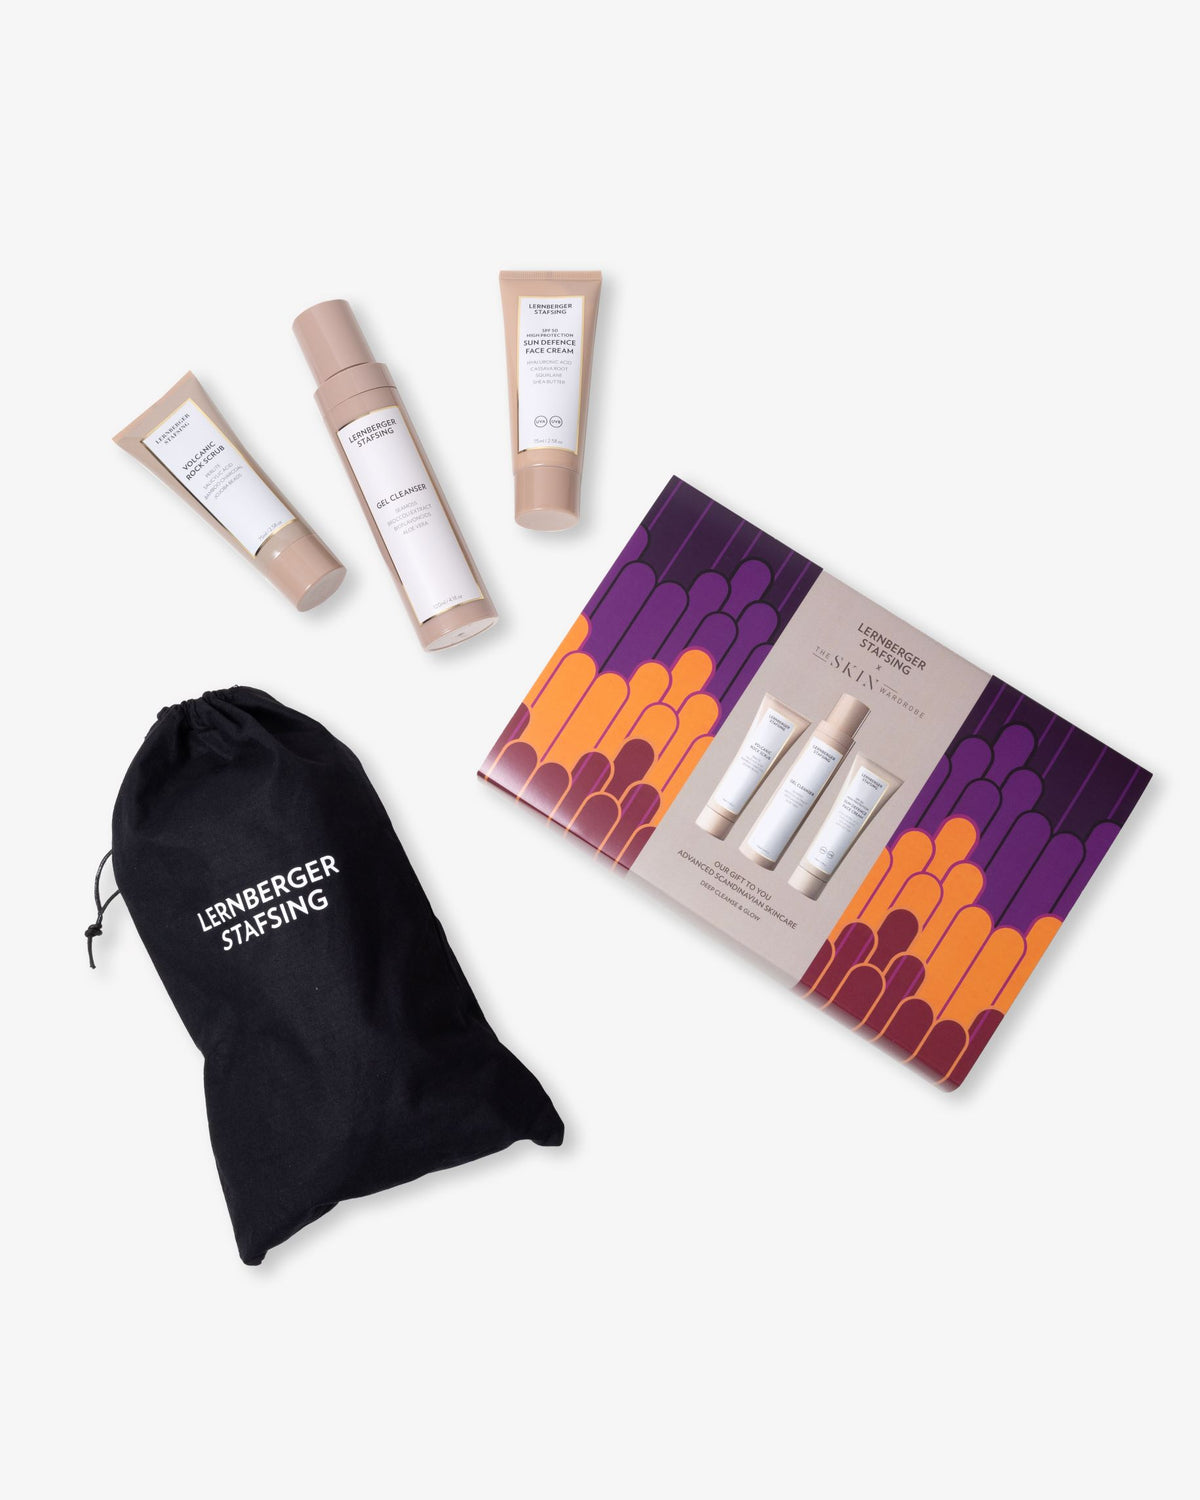 Lernberger Stafsing x The Skin Wardrobe LIMITED EDITION Skincare Set